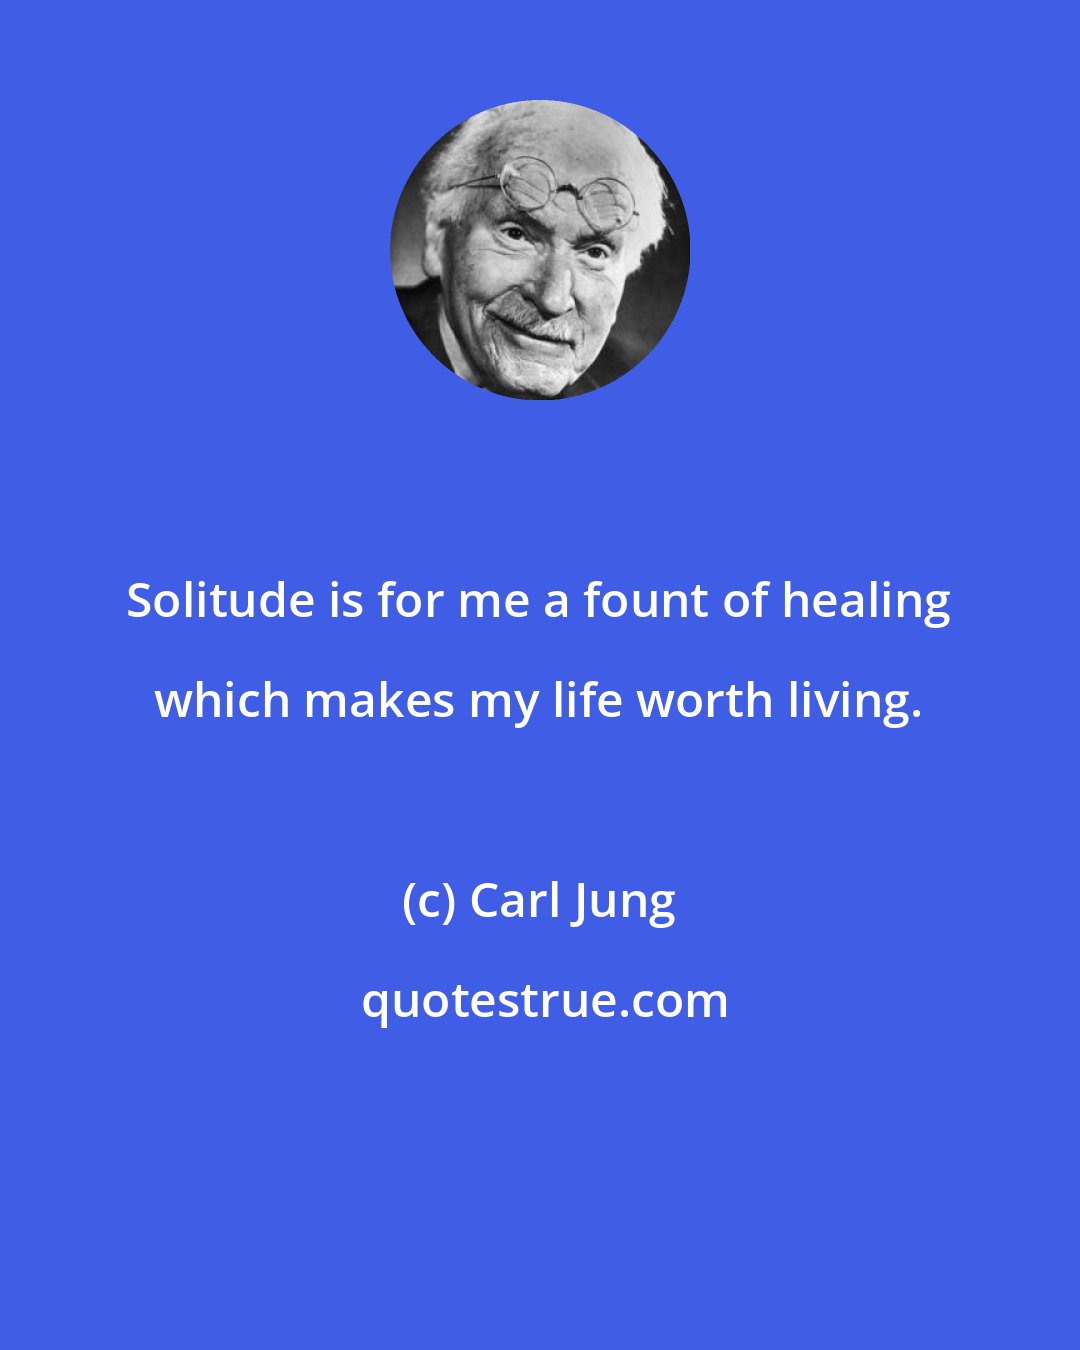 Carl Jung: Solitude is for me a fount of healing which makes my life worth living.